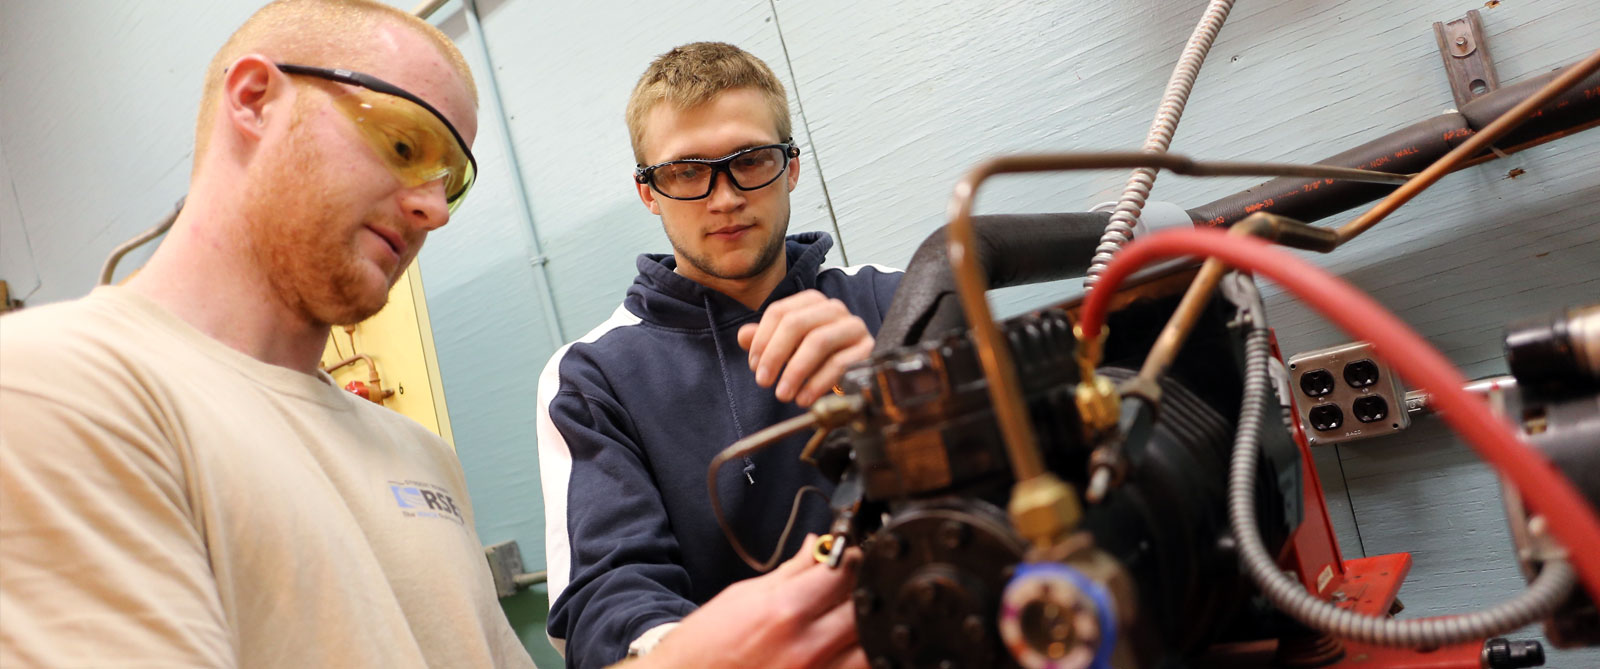 Two students working on machinery